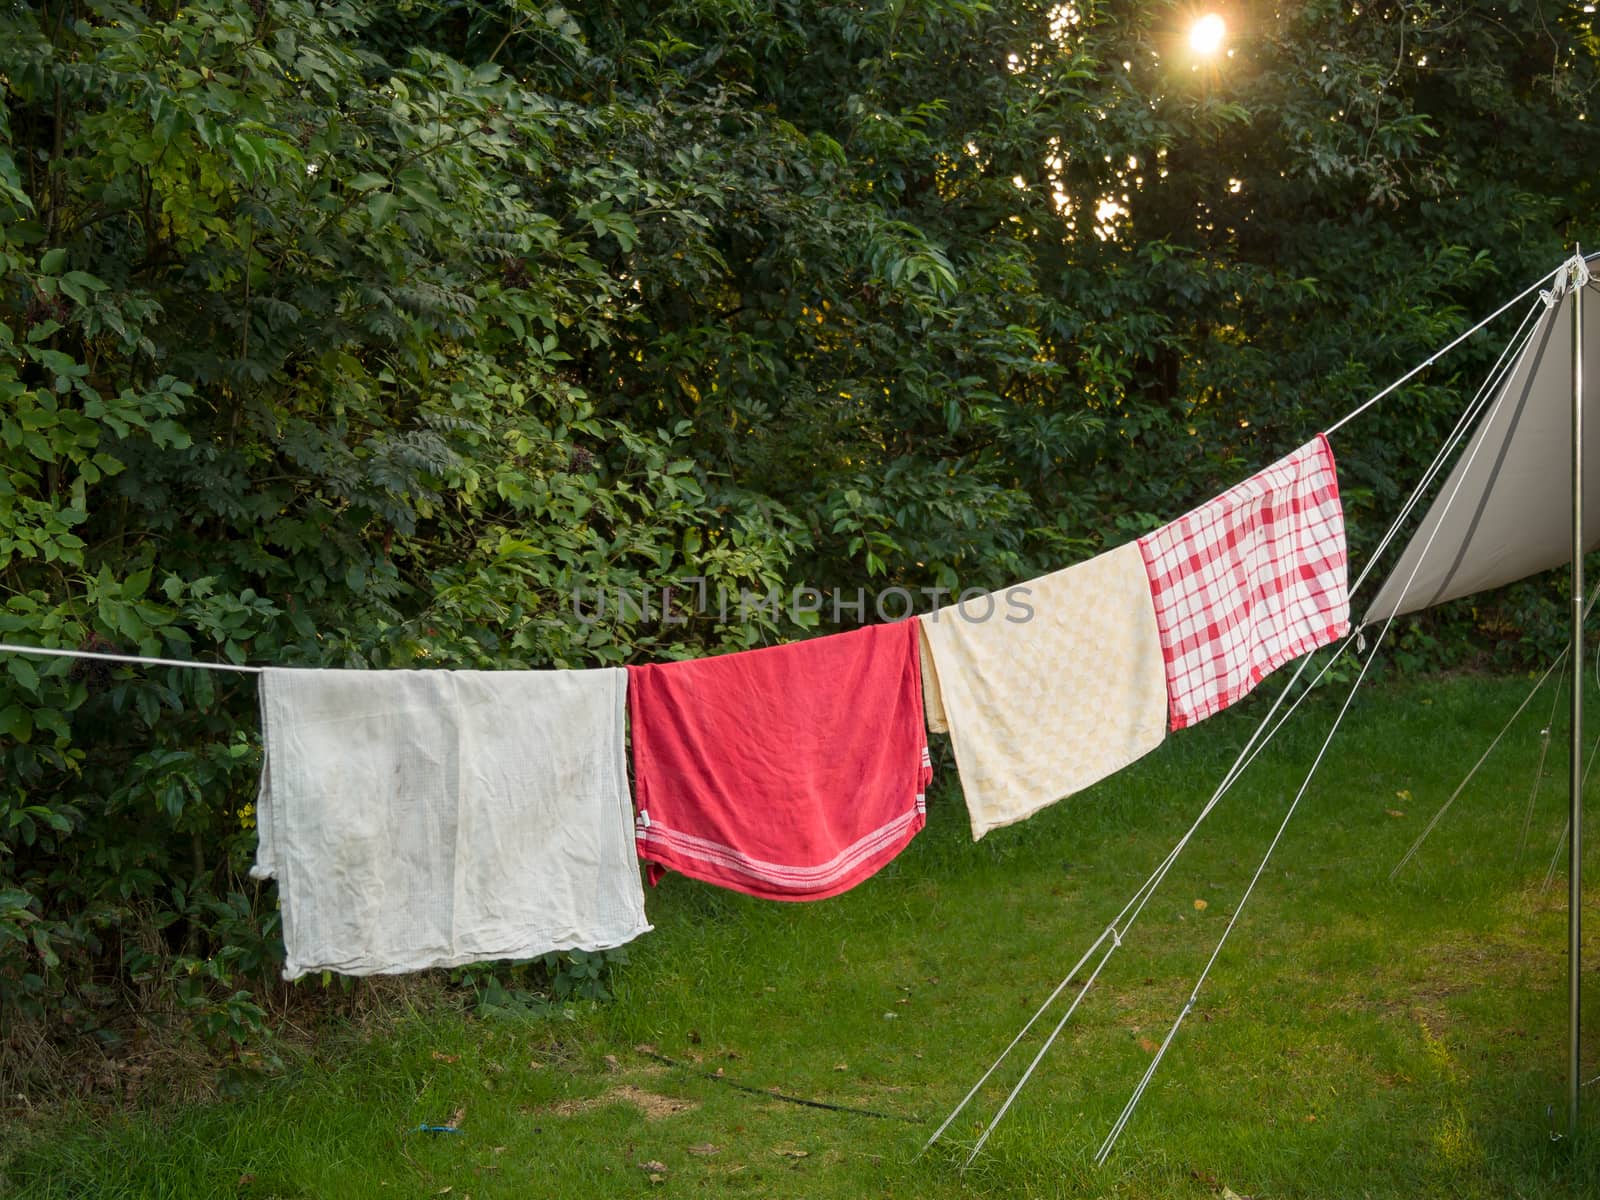 A line of towels hanging out to dry outside a tent on a summer evening